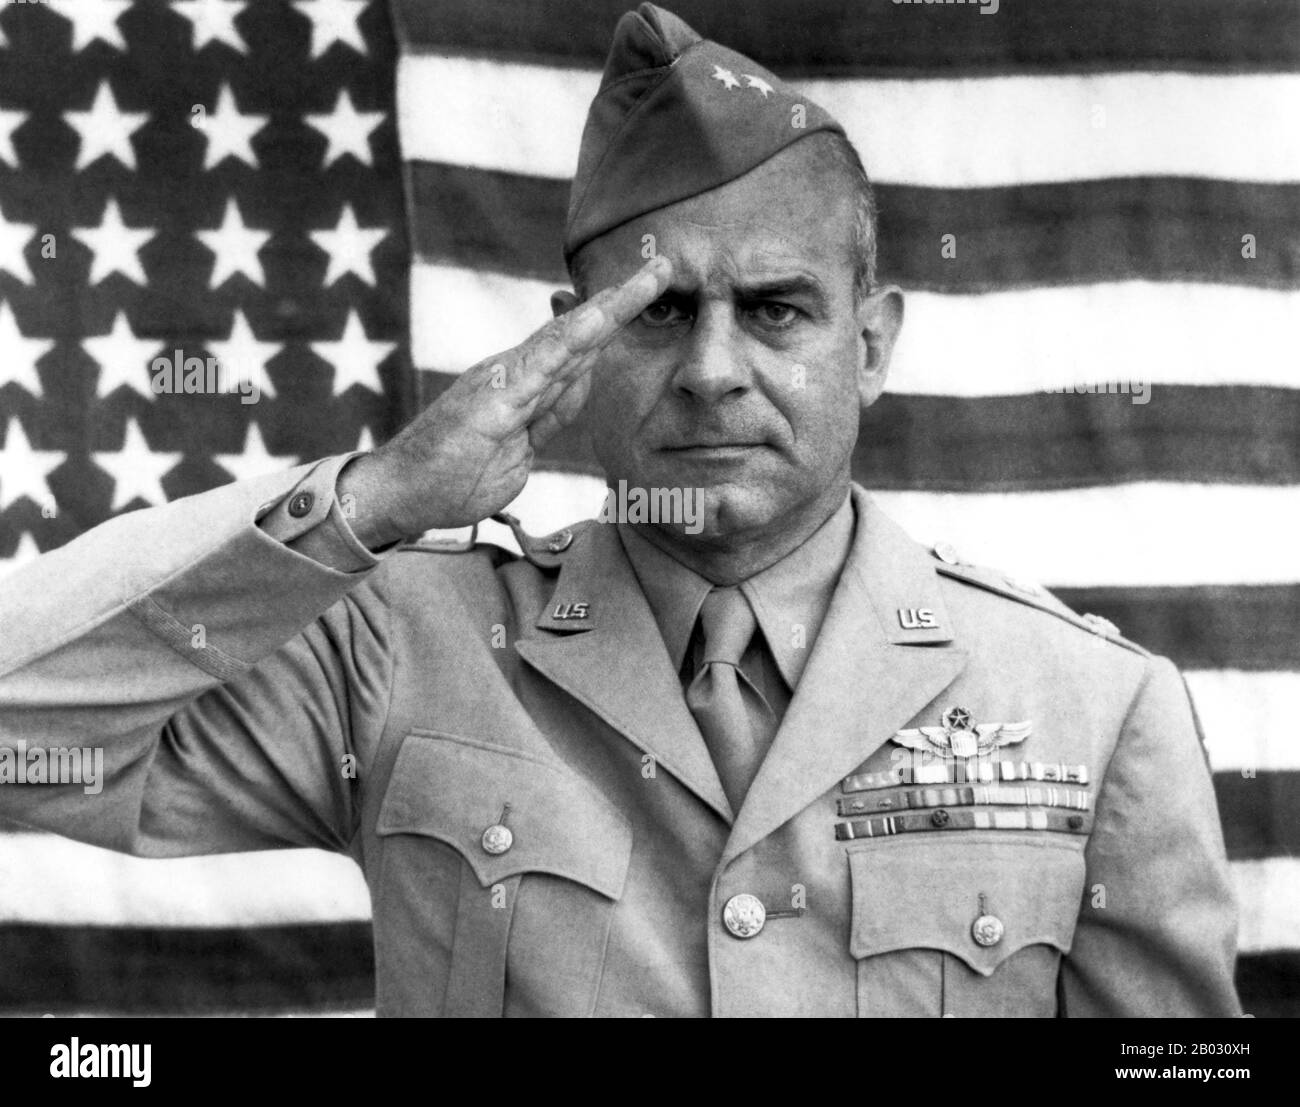 James Harold 'Jimmy' Doolittle (December 14, 1896 – September 27, 1993) was an American aviation pioneer. Doolittle served as a commissioned officer in the United States Army Air Forces during the Second World War and was awarded the Medal of Honor for his valor and leadership as commander of the Doolittle Raid against Japan.  The Doolittle Raid, also known as the Tokyo Raid, on 18 April 1942, was an air raid by the United States on the Japanese capital Tokyo and other places on Honshu island during World War II, the first air raid to strike the Japanese Home Islands. It demonstrated that Japa Stock Photo